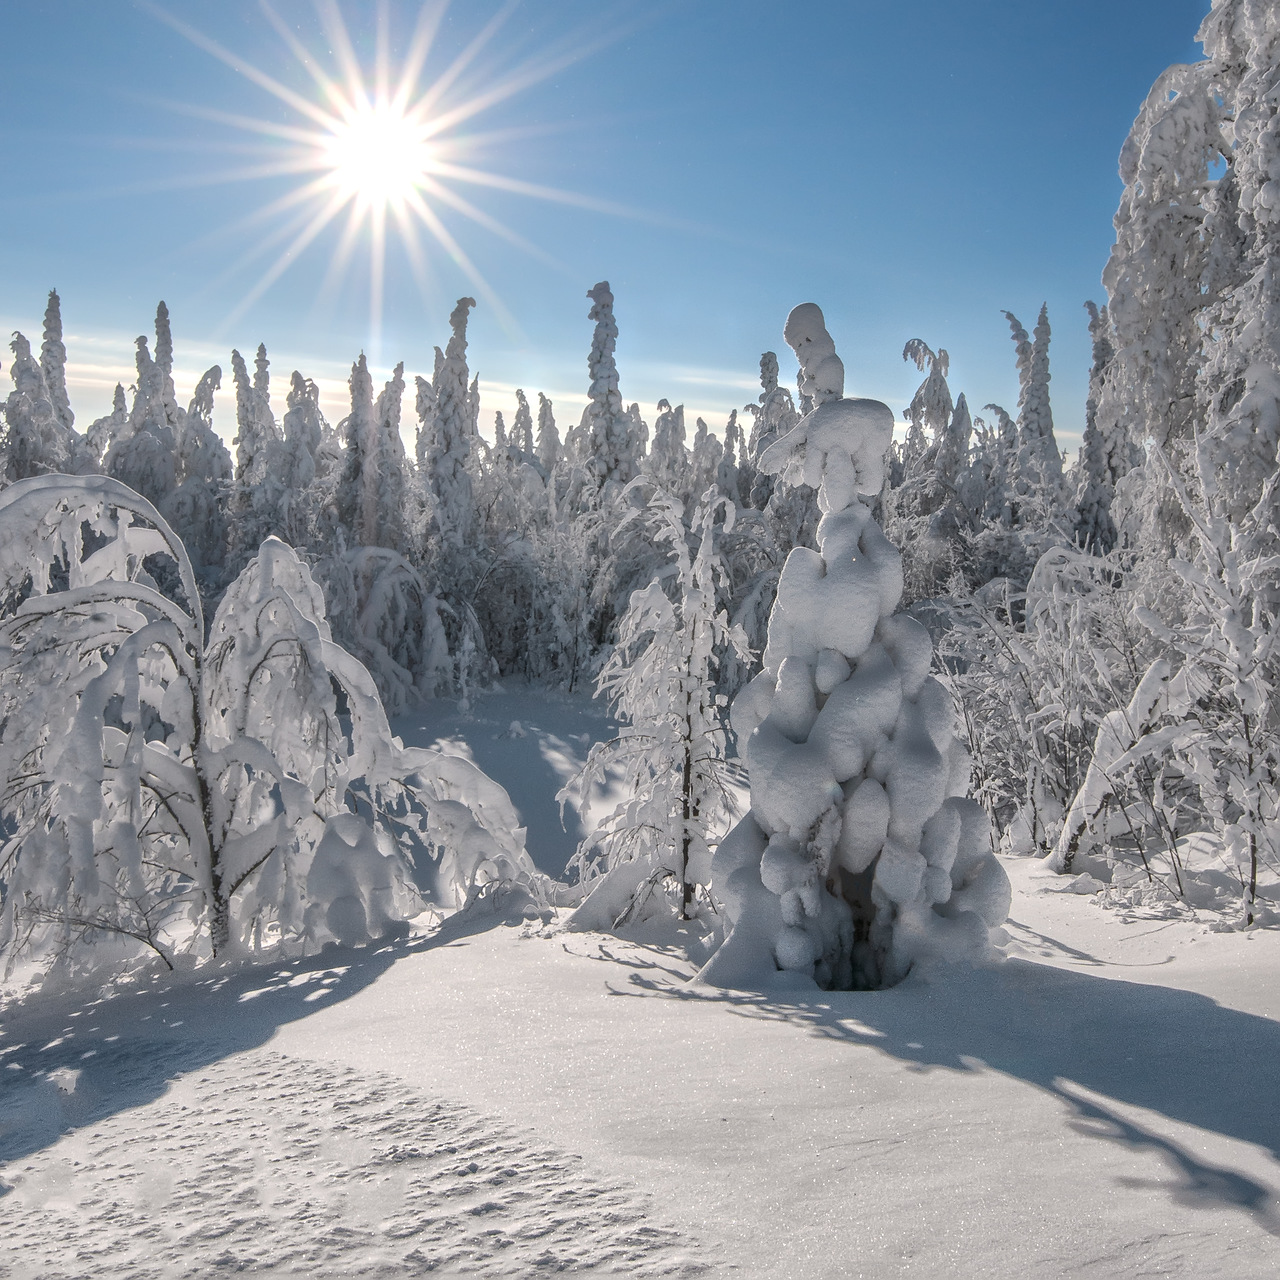 Photos of winter: The sun in the winter forest